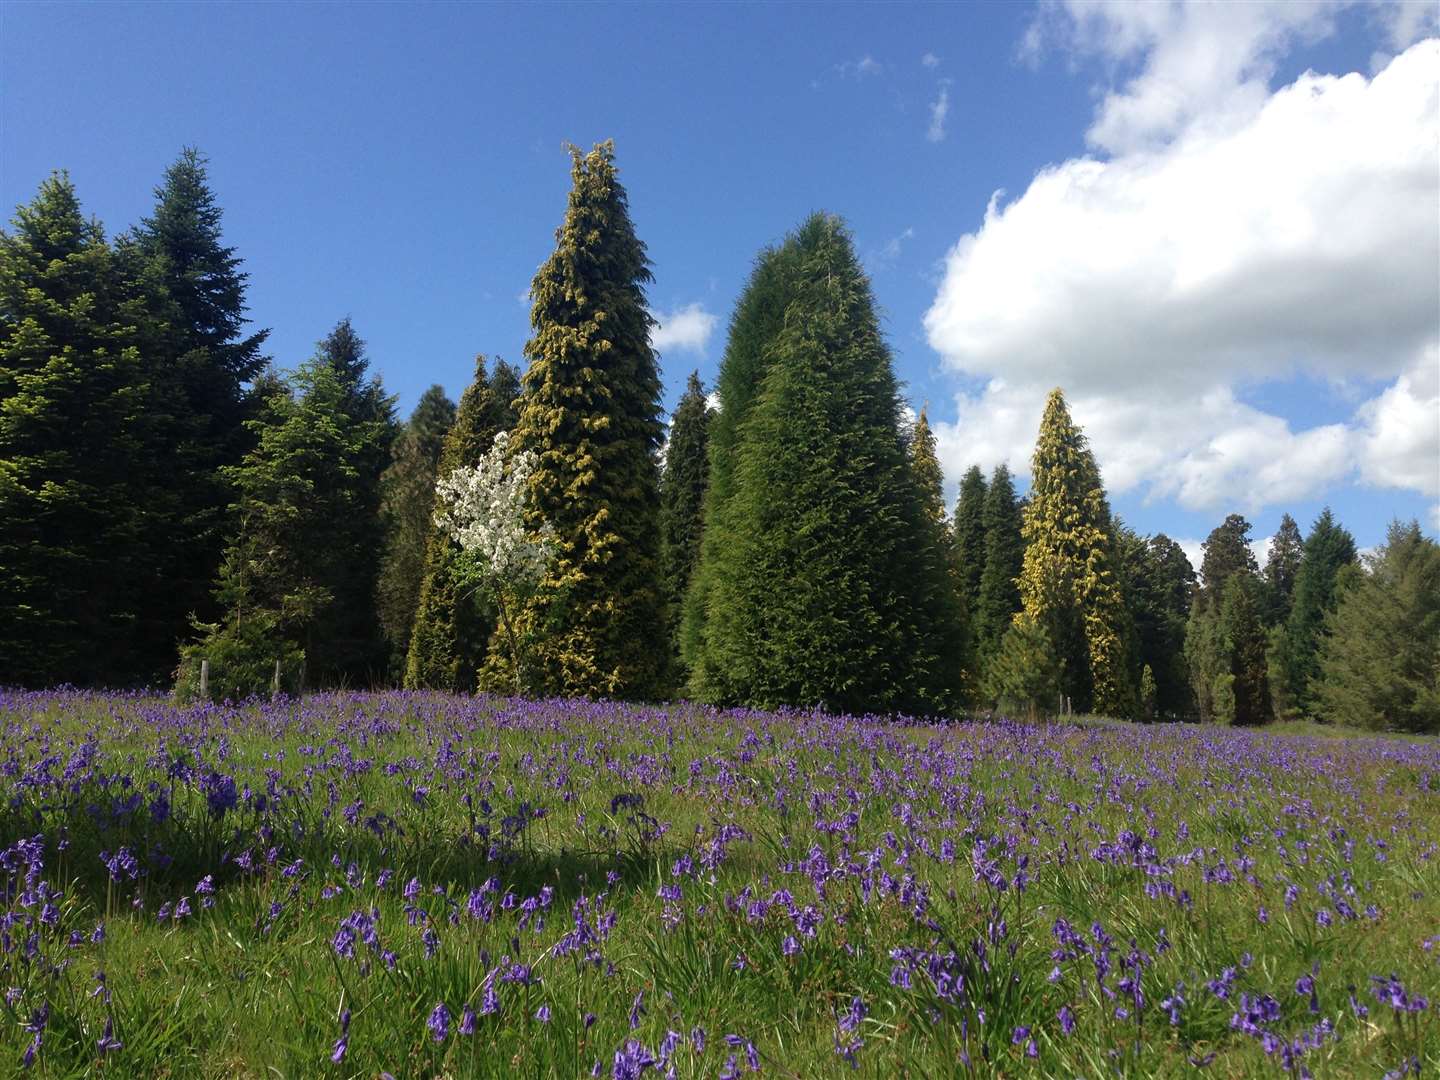 Bluebells at Bedgebury pinetum (Forestry England/PA)